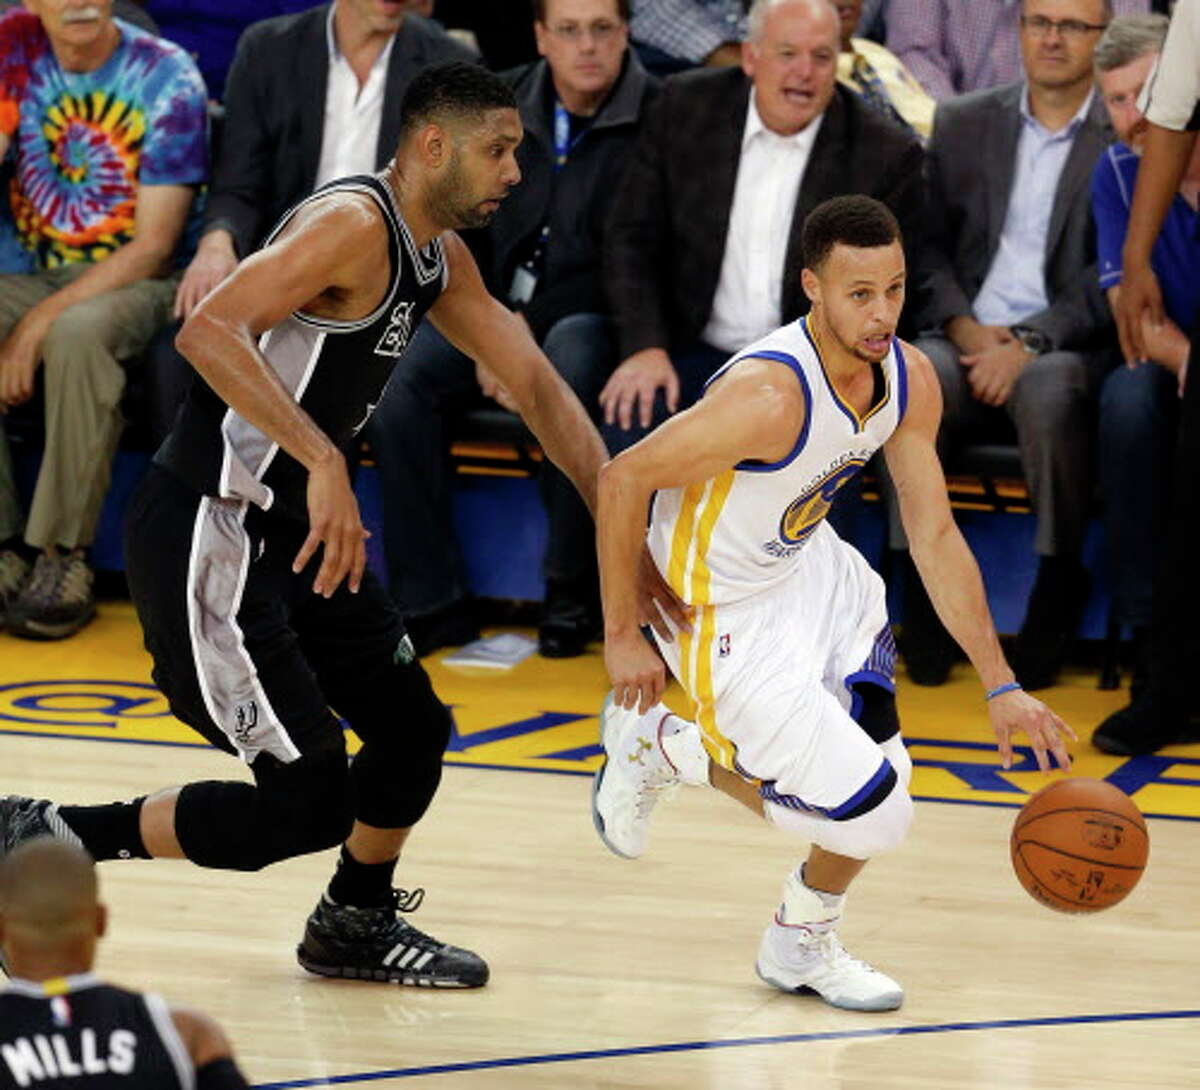 Golden State Warriors' Stephen Curry dribbles past San Antonio Spurs' Tim Duncan in 1st quarter during NBA game at Oracle Arena in Oakland, Calif., on Thursday, April 7, 2016.